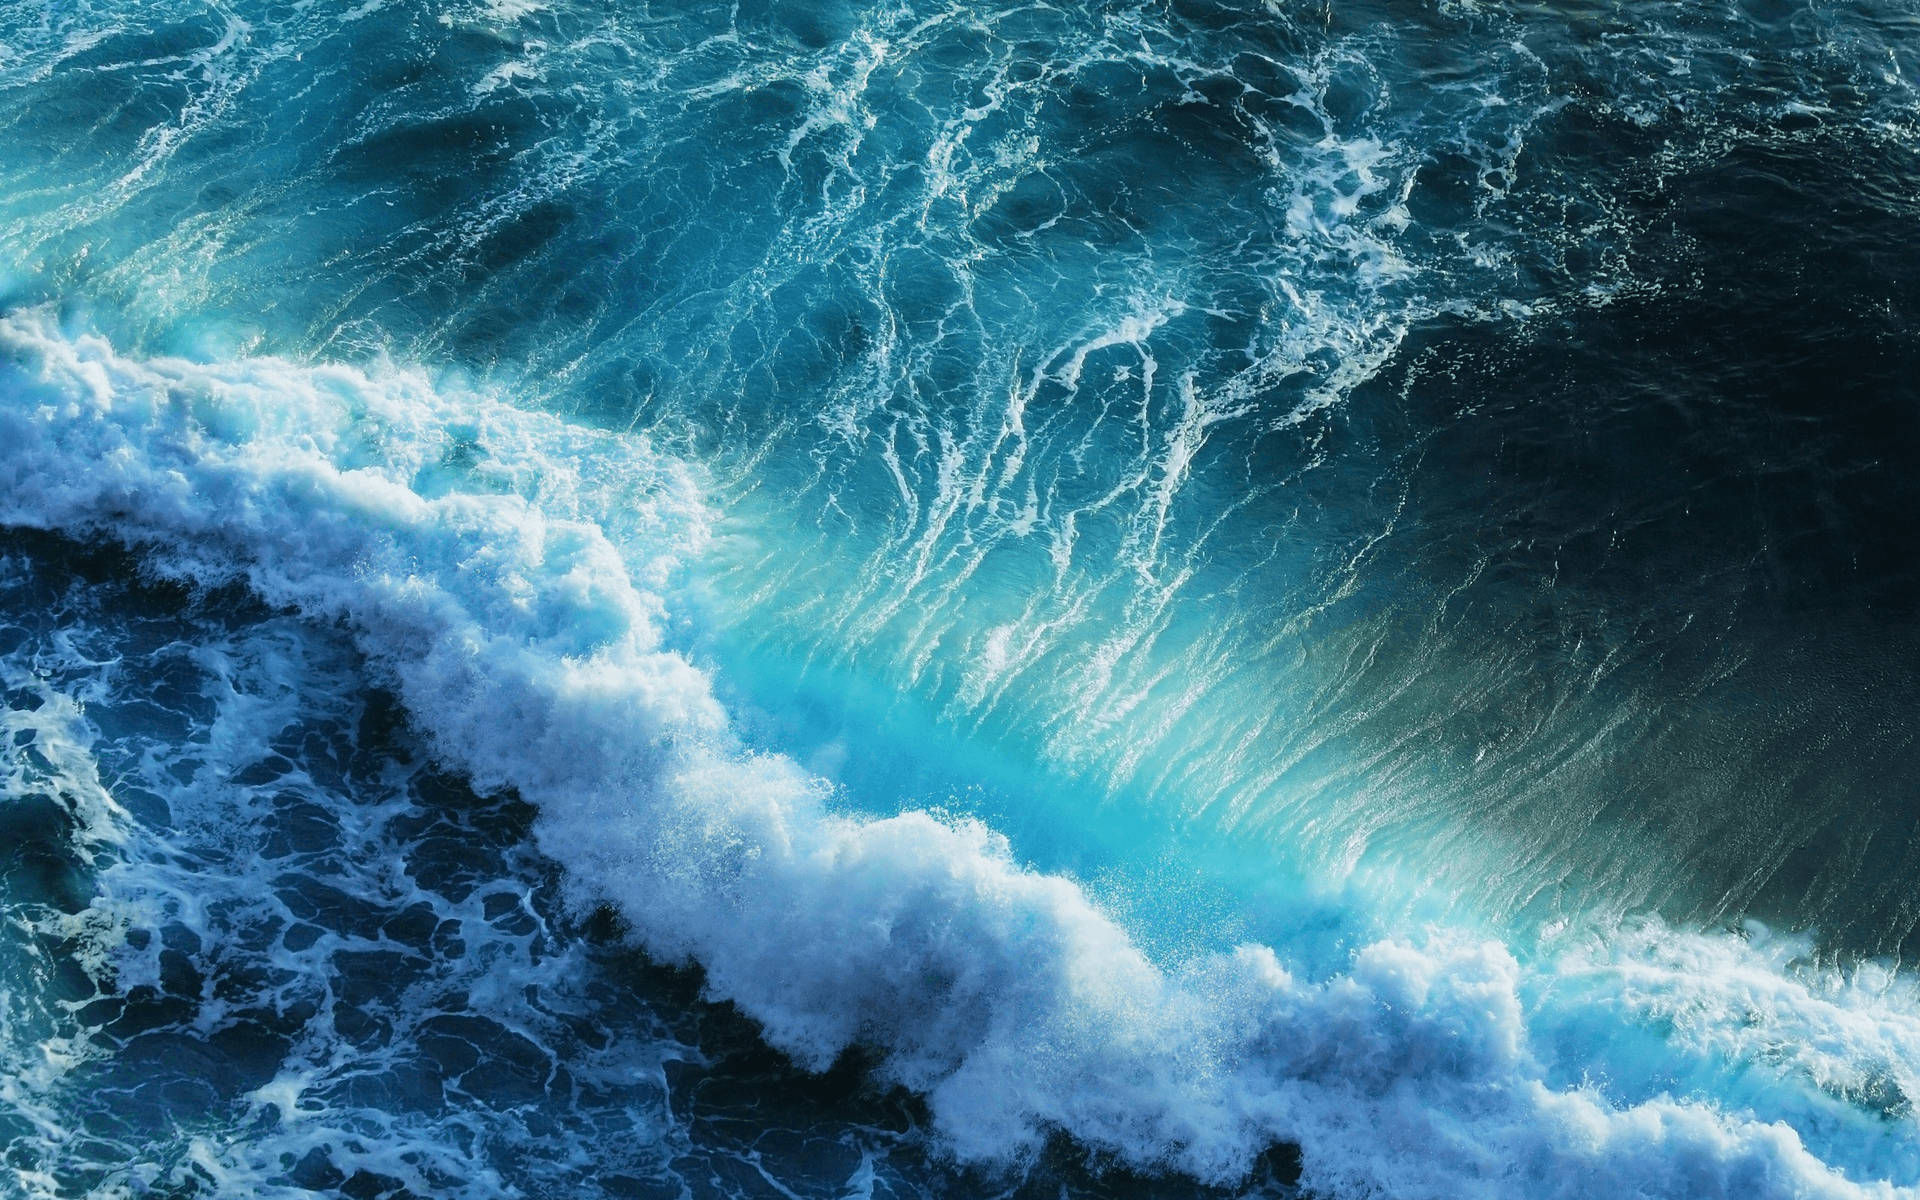 Feel the power of the ocean waves, captured in their pristine beauty Wallpaper